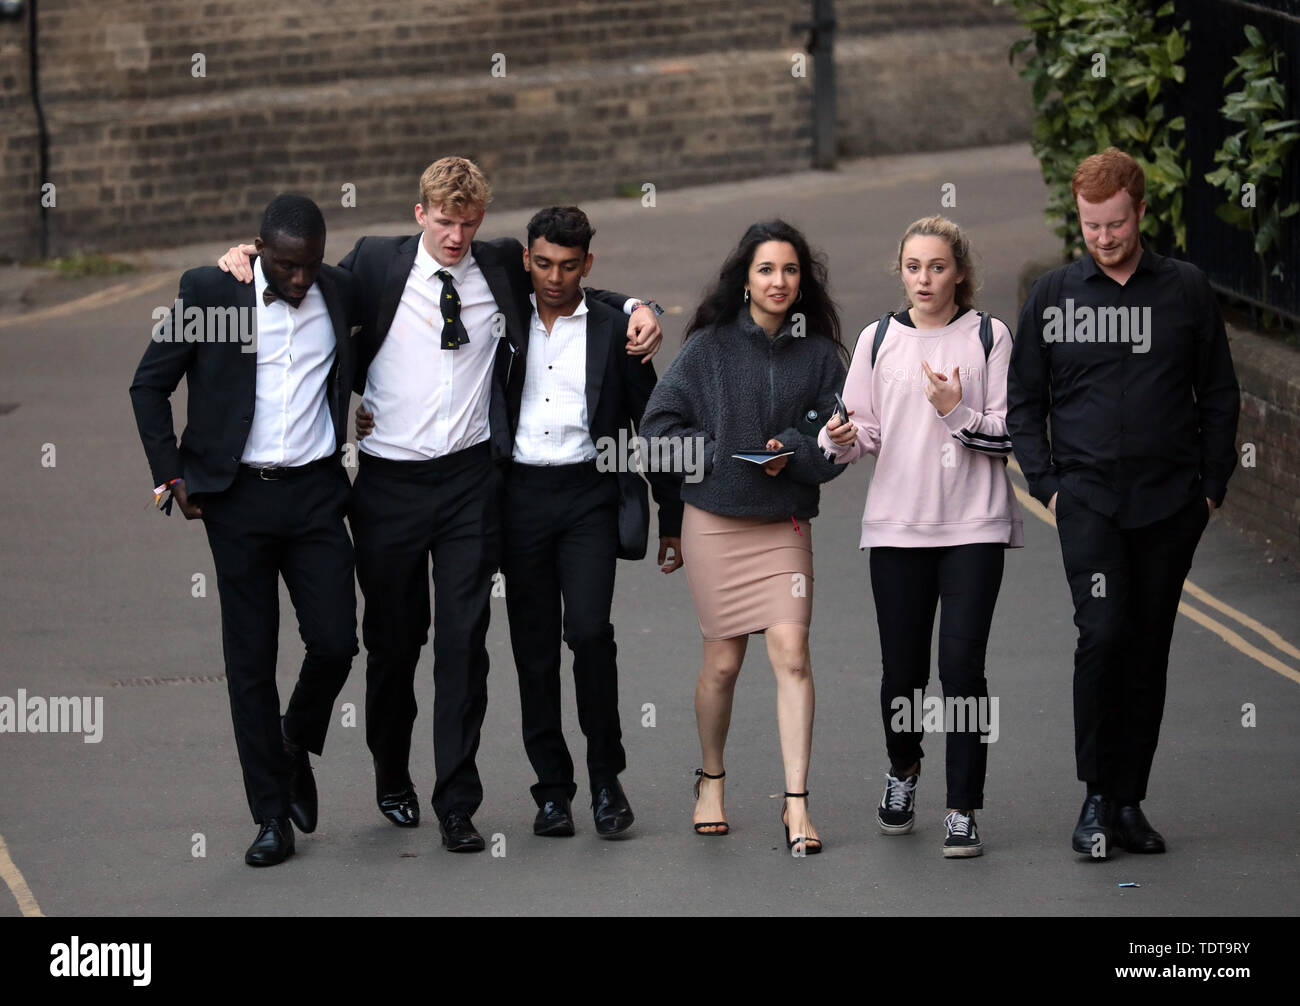 Cambridge, Cambridgeshire, UK. 18th June, 2019. University students make their way home in the early hours of the morning after celebrating the end of their exams and attending the Trinity May Ball, Cambridge, Cambridgeshire, on June 18, 2019. Credit: Paul Marriott/Alamy Live News Stock Photo